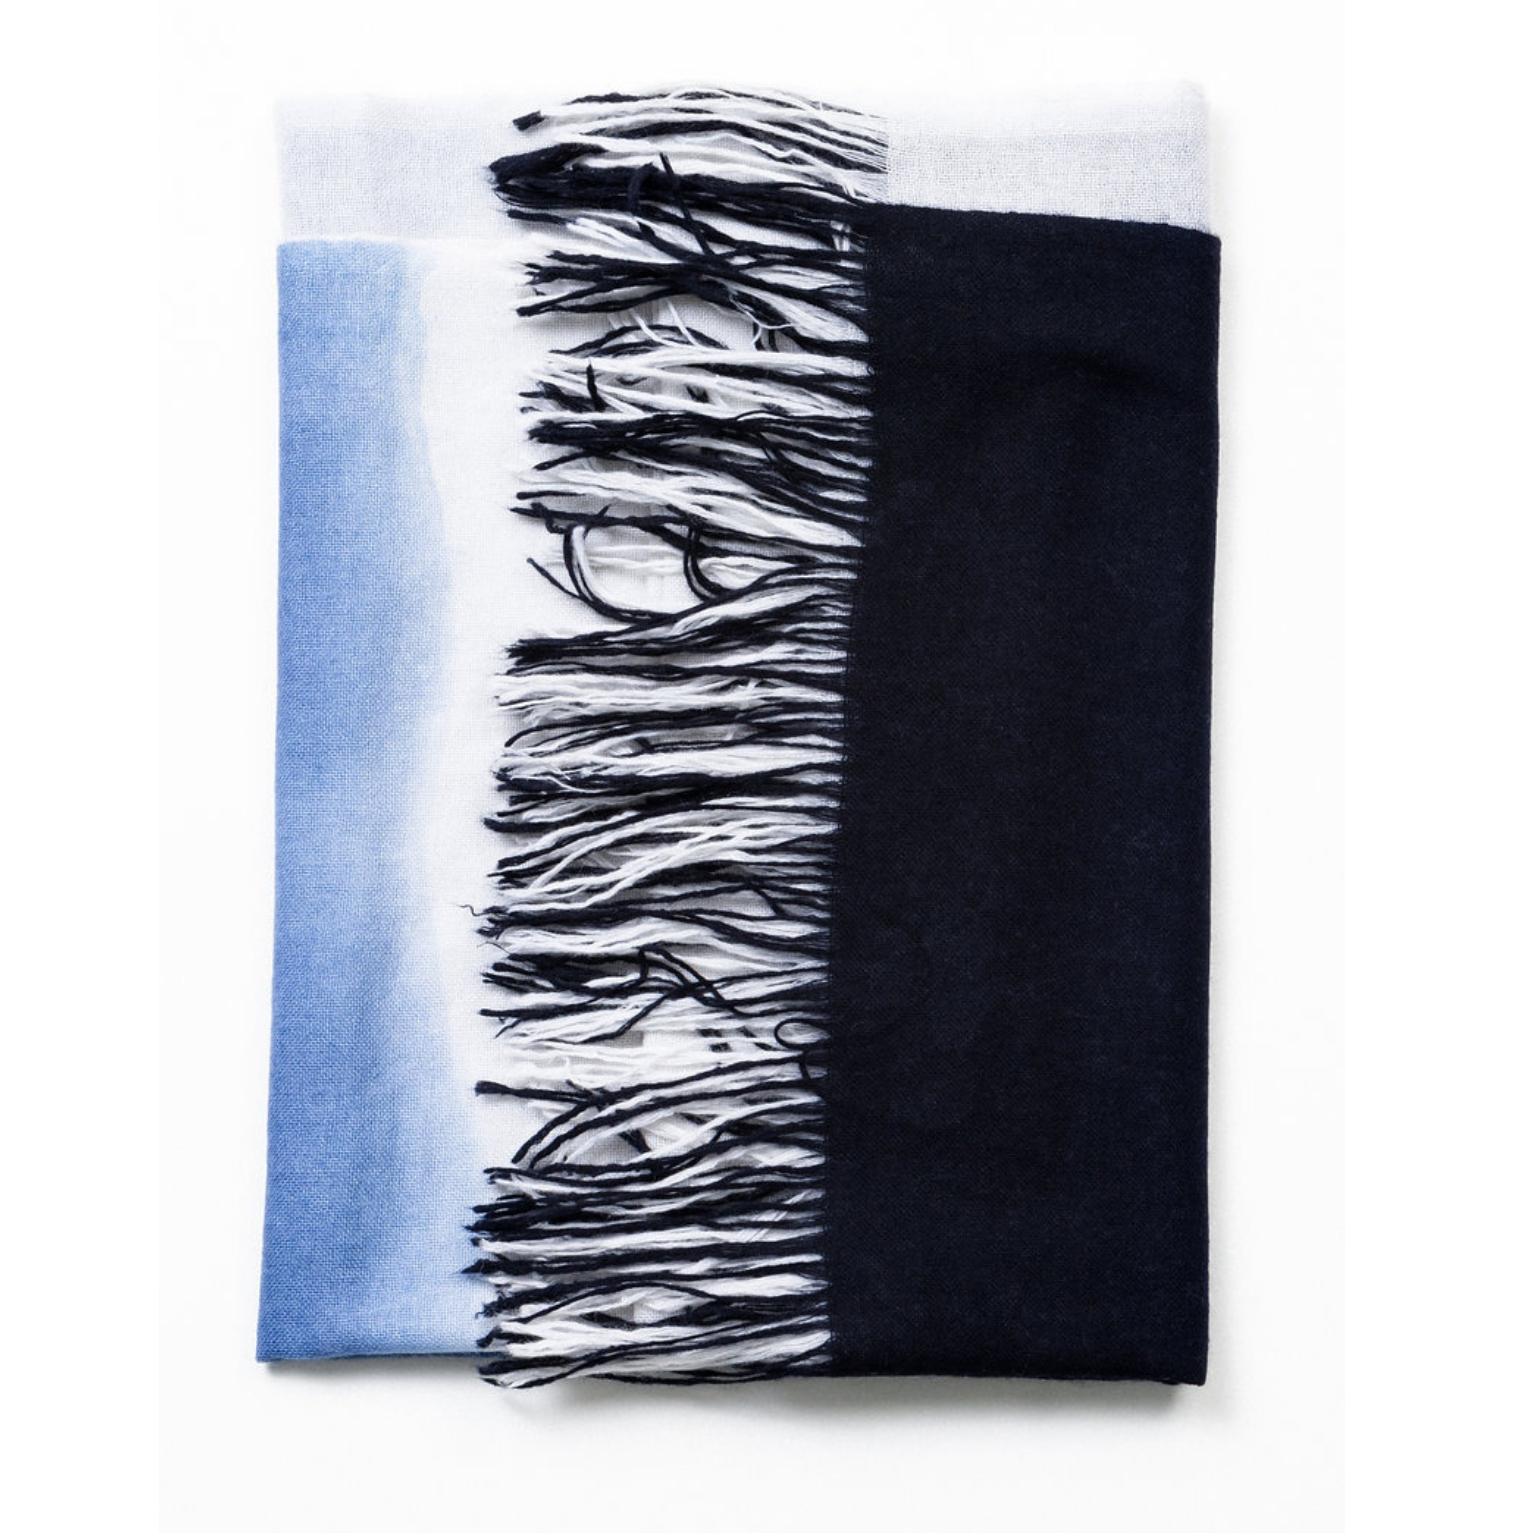 Custom design by Studio Variously, AZURE throw / blanket is handwoven by master weavers in Nepal and dip dyed entirely with eco-friendly certified Swiss dyes. A sustainable design brand based out of Michigan, Studio Variously exclusively